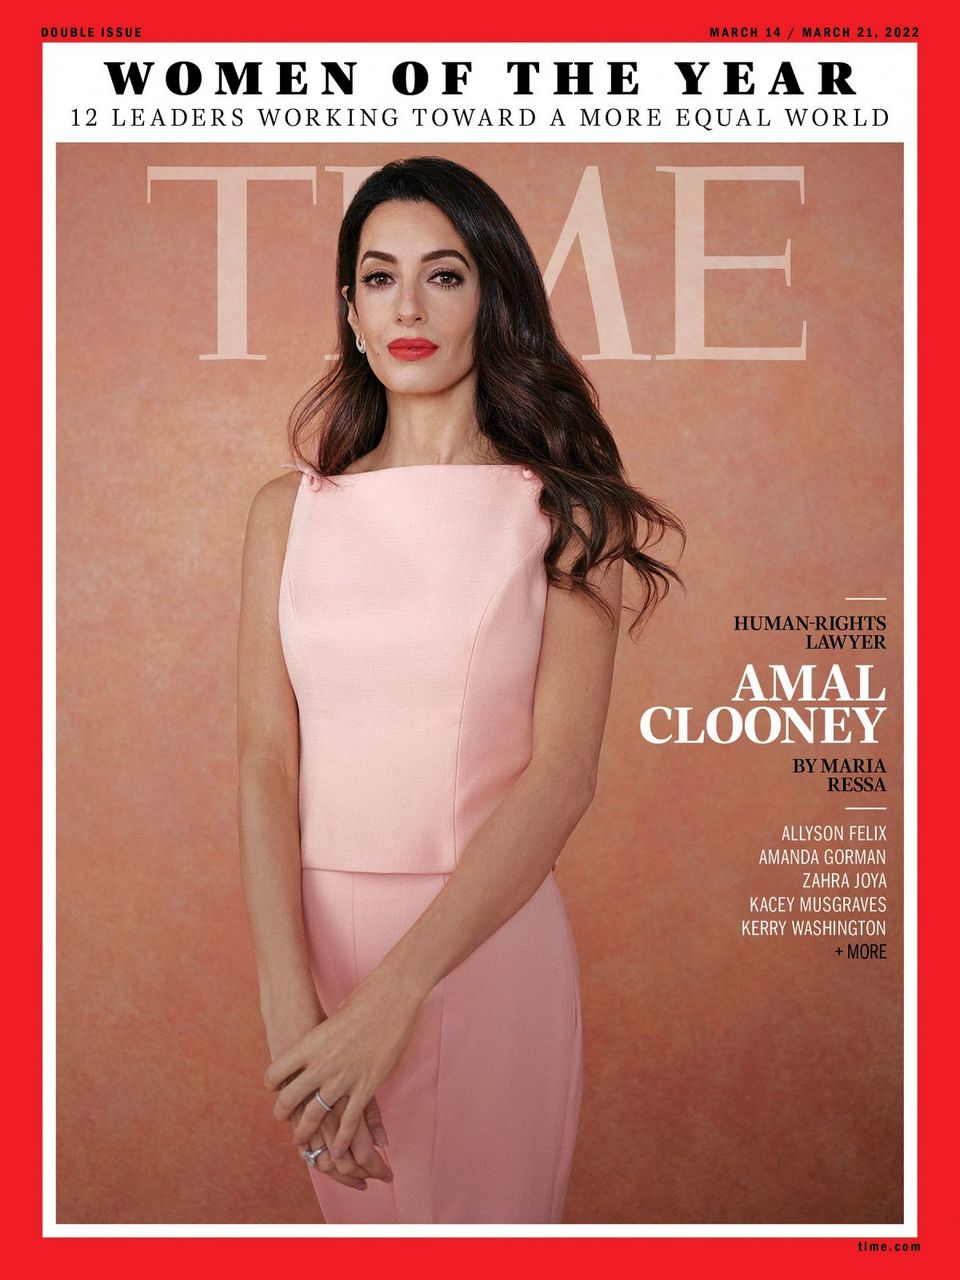 Amal Clooney Time Magazine Women Of Year 2022 Issue